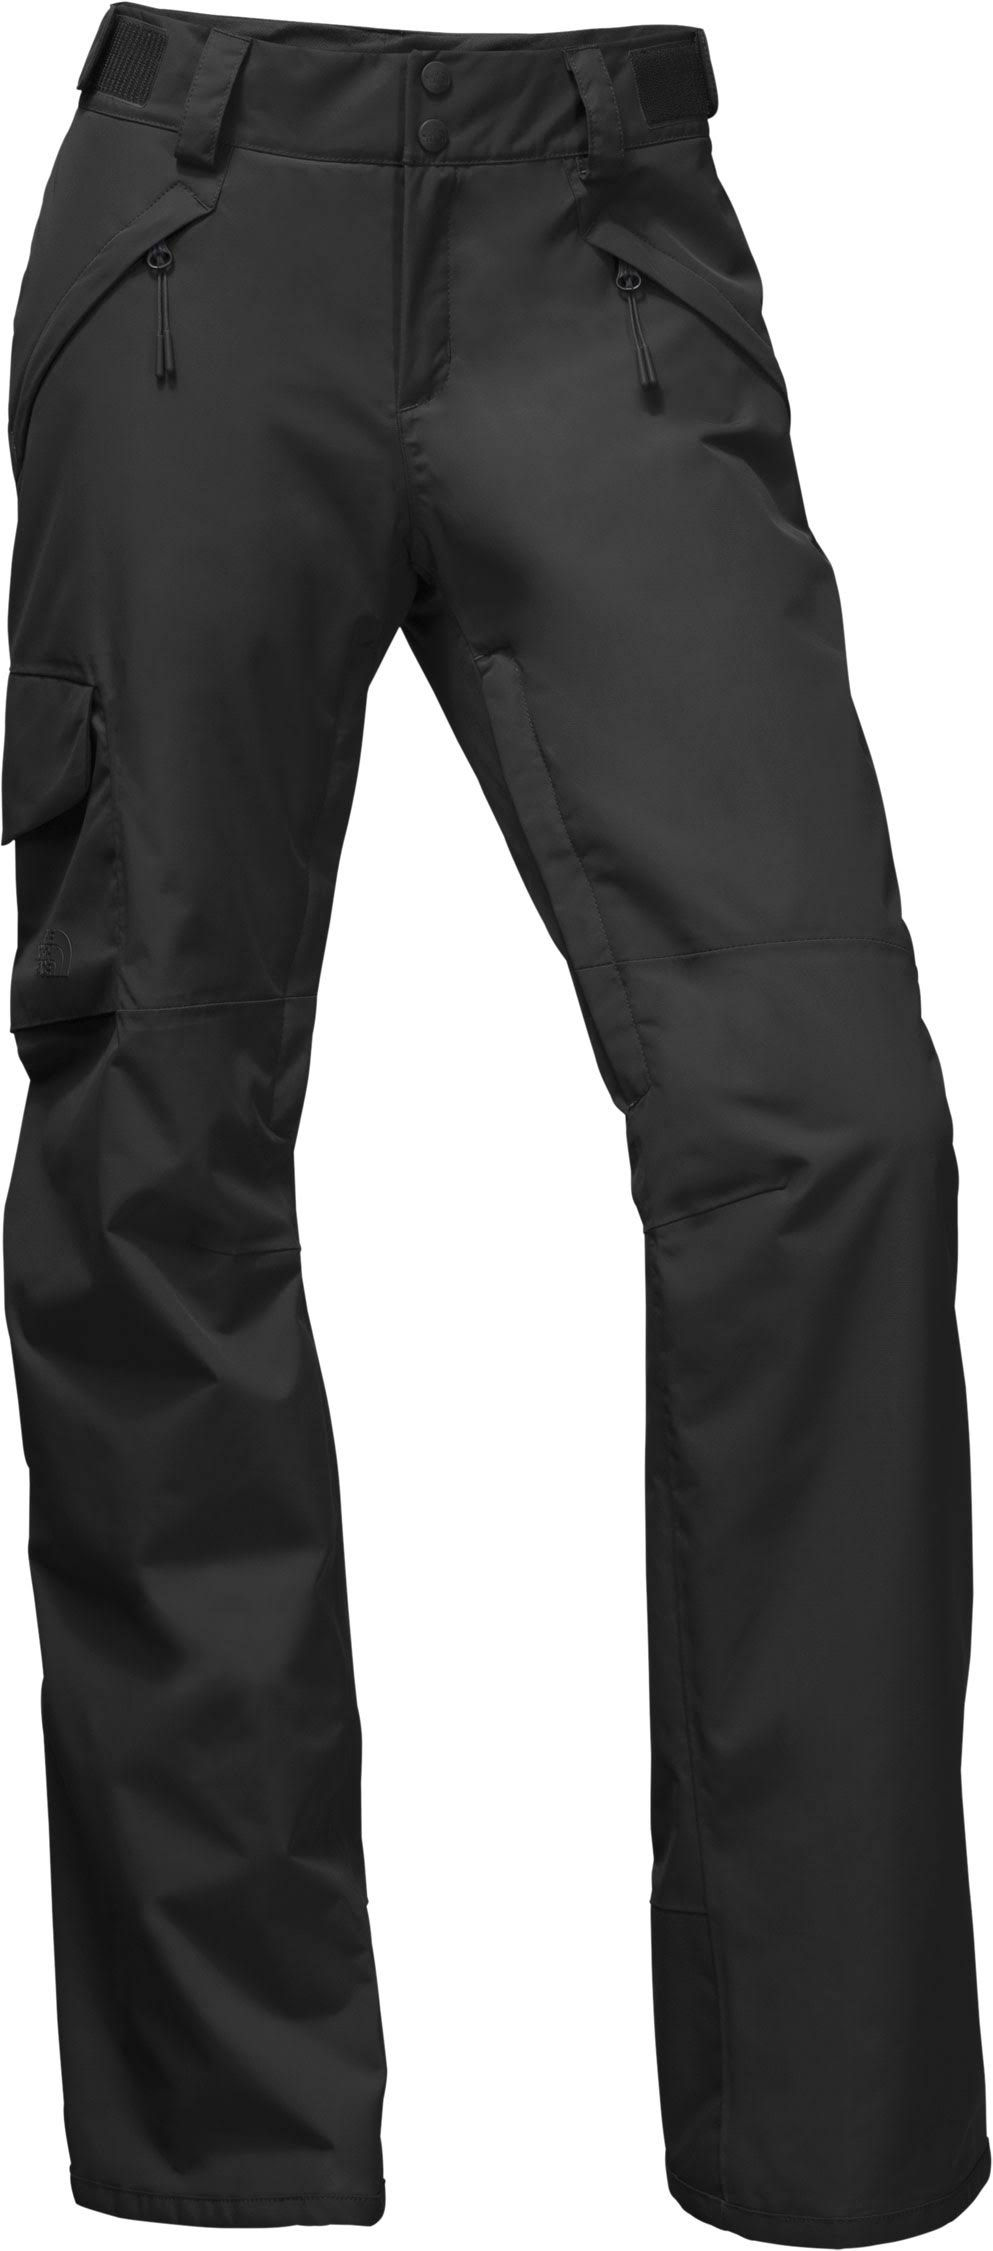 THE NORTH FACE Freedom Women's Insulated Pants